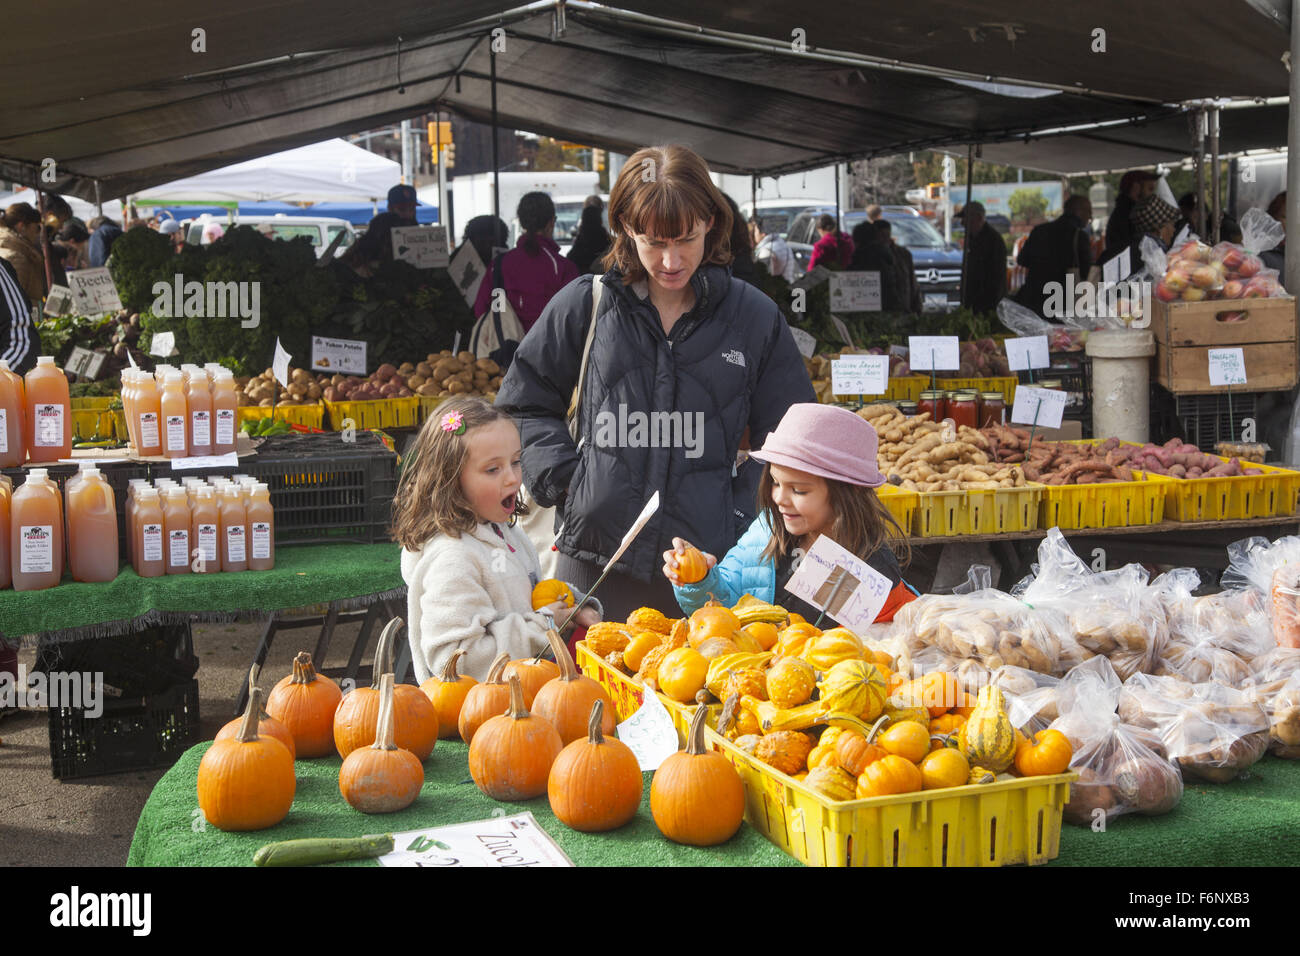 Menschen-Shop an der Grand Army Plaza Farmers Market in Park Slope, Brooklyn, NY. Stockfoto